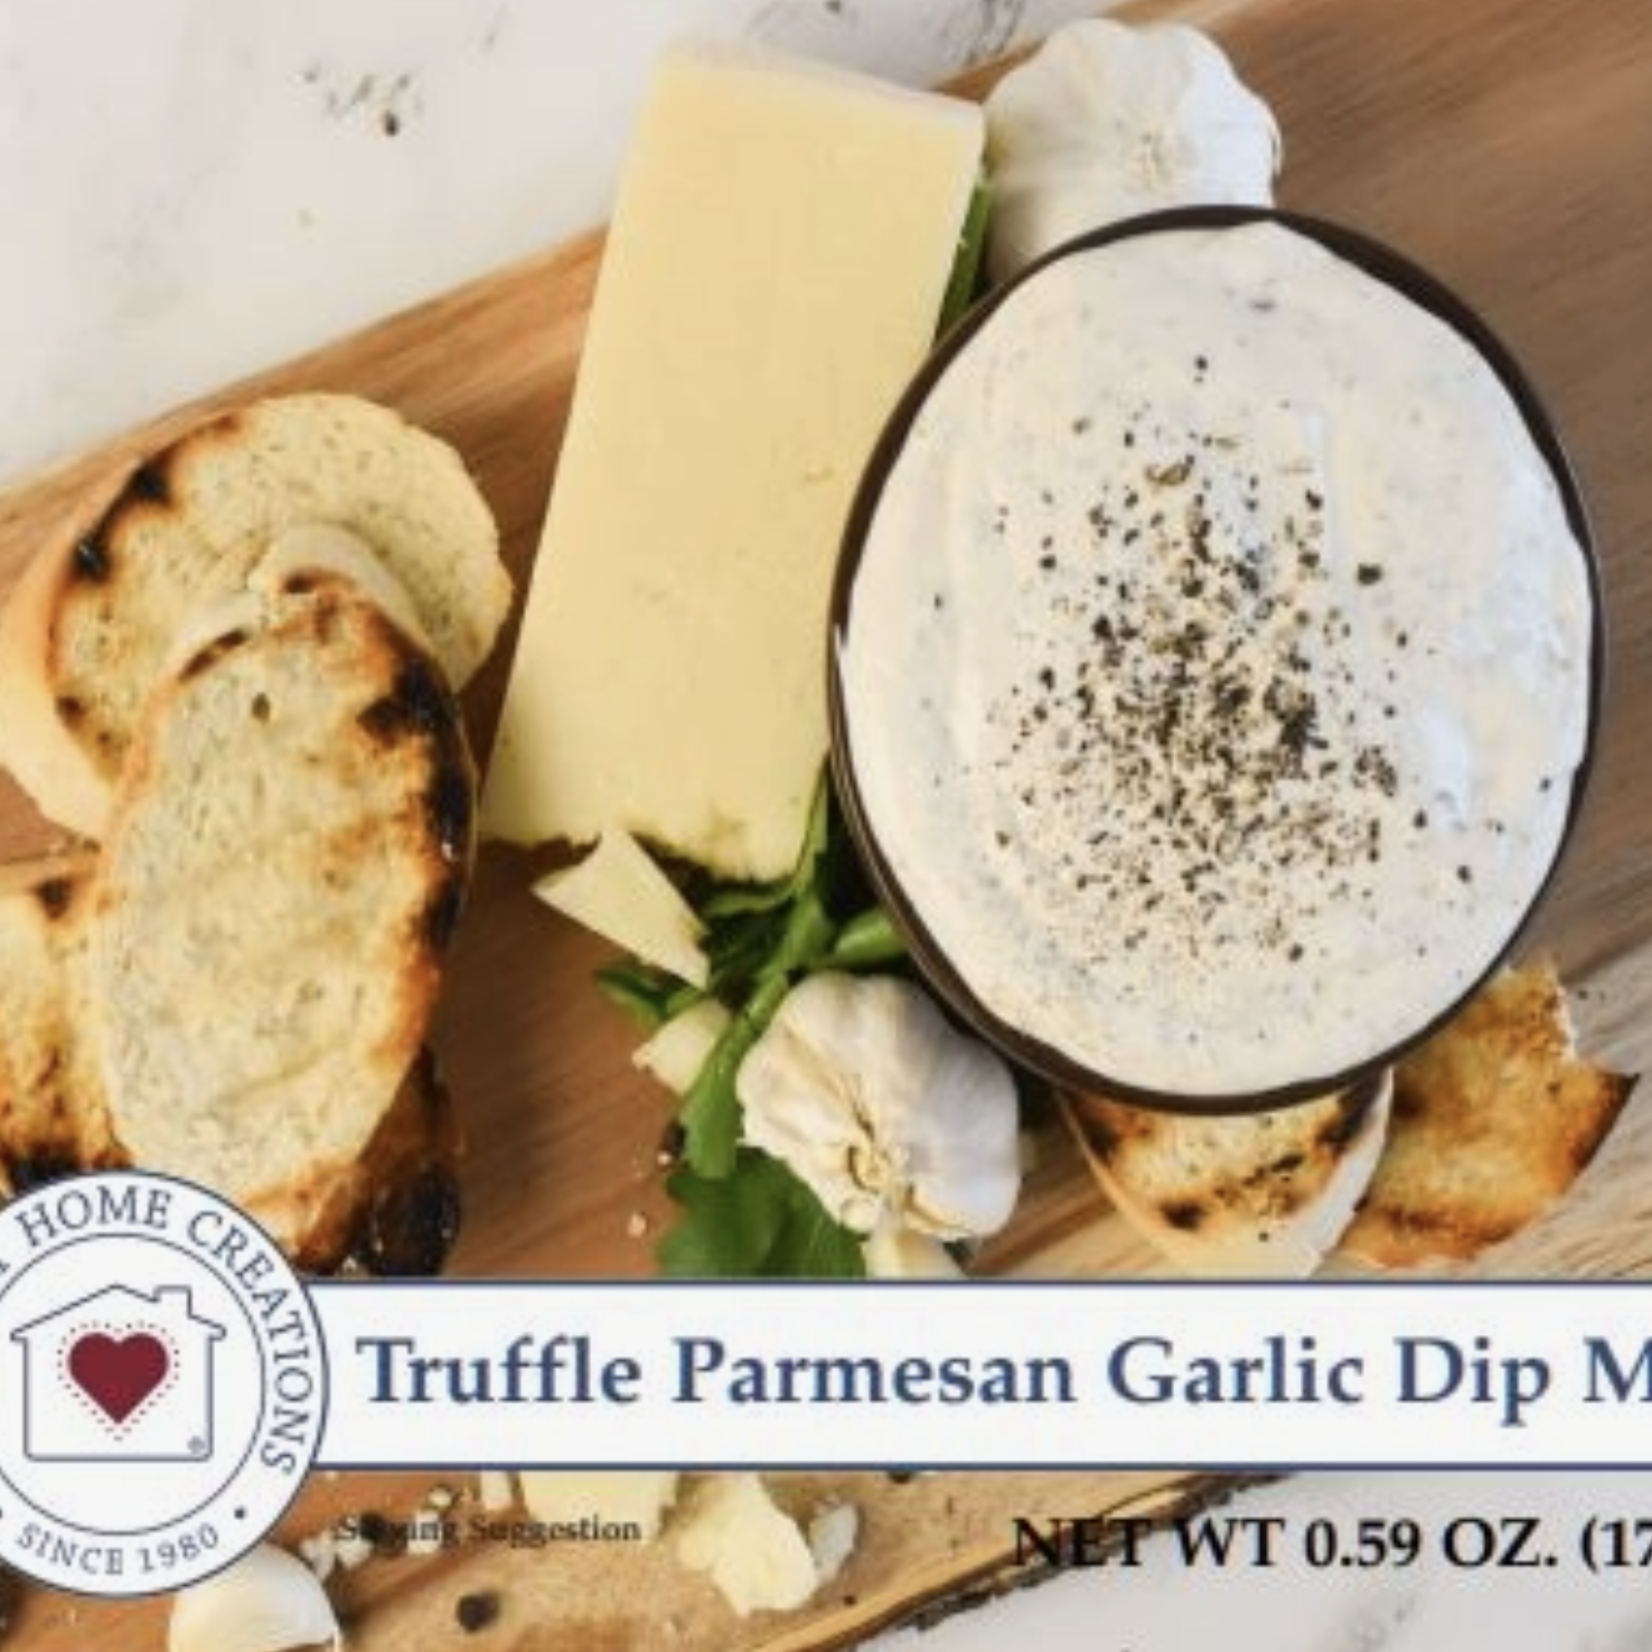 Country Home Creations Truffle Parmesan Garlic Dip Mix